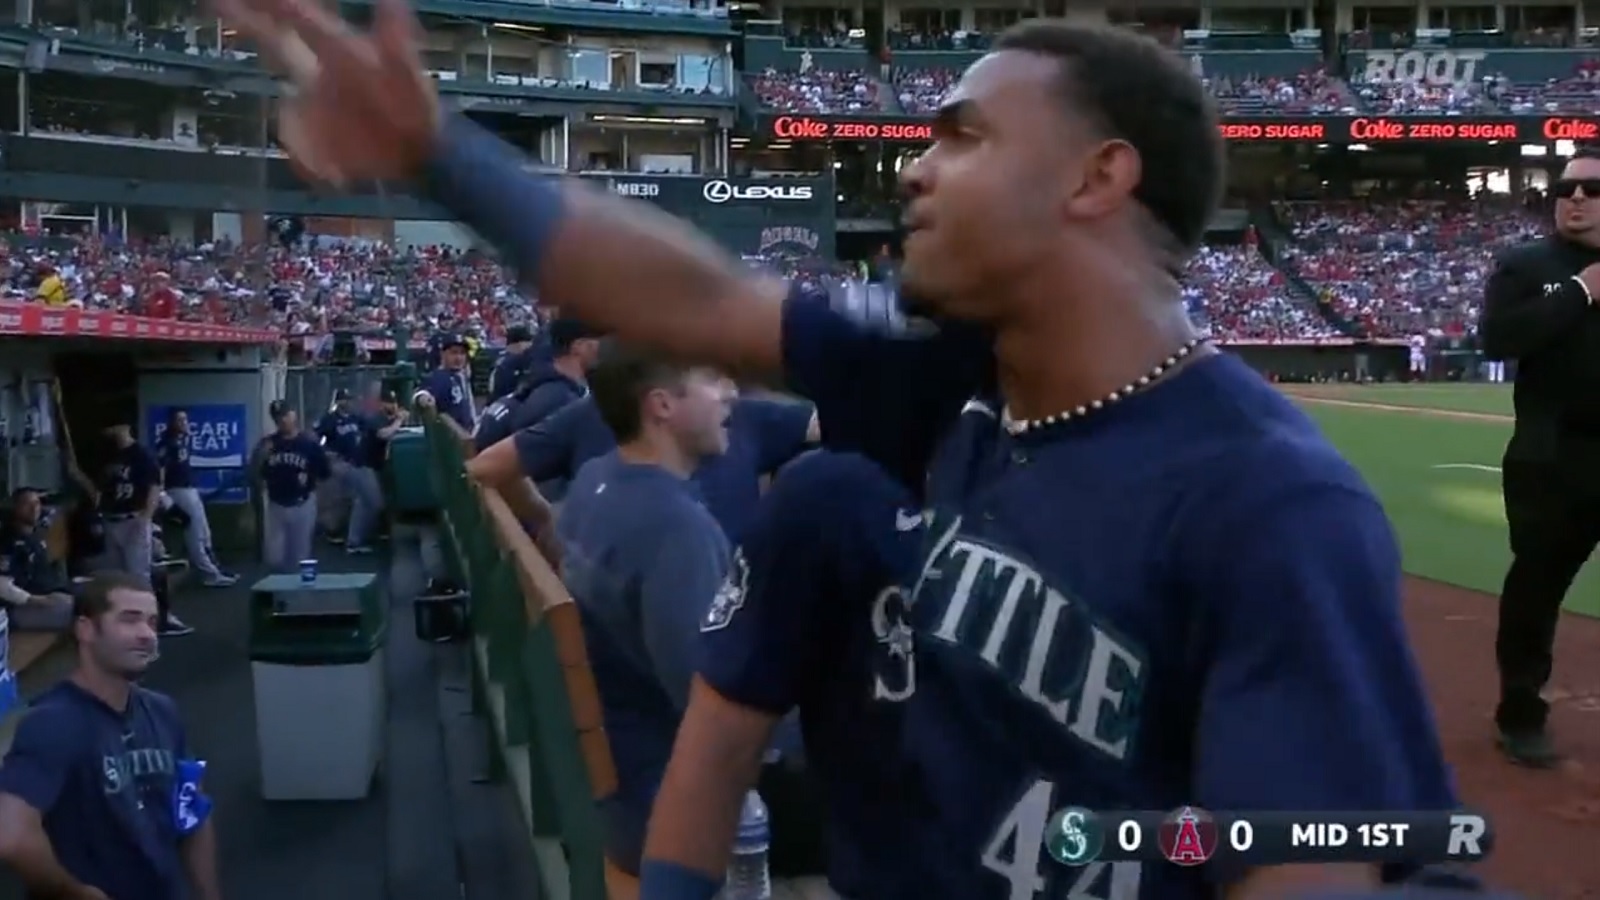 Seattle Mariners prospect Julio Rodriguez gave fans a scare